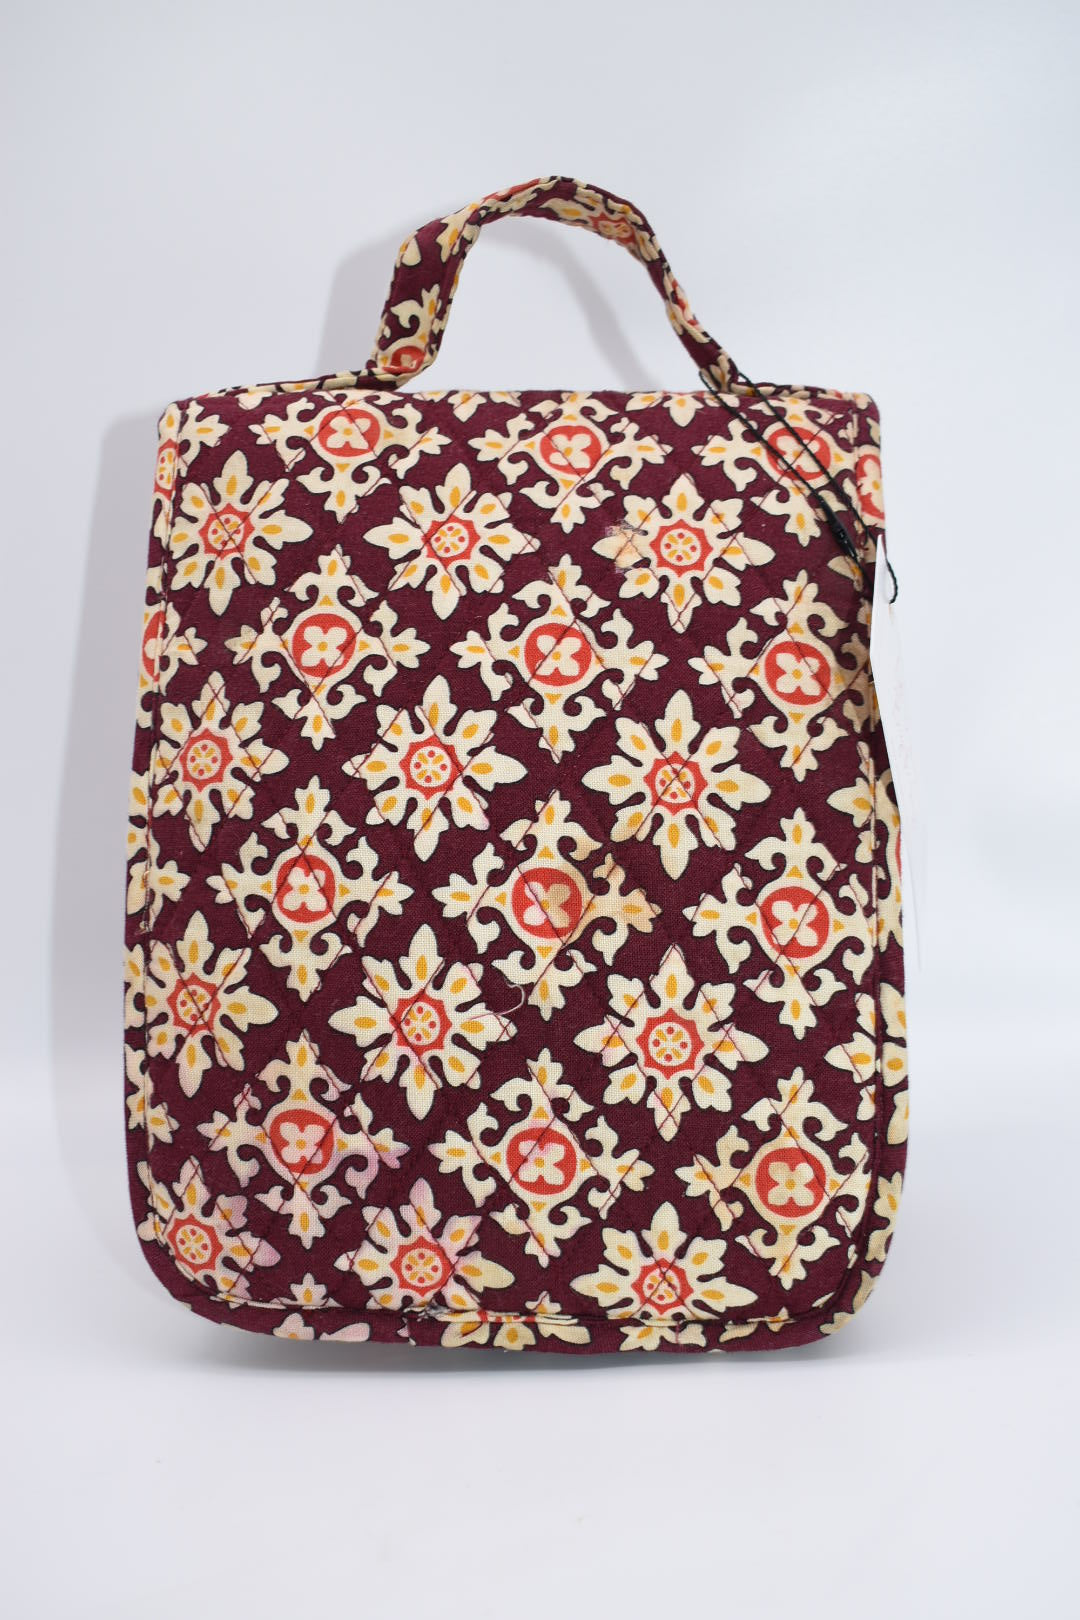 Vera Bradley "Out to Lunch" Bag in "Medallion -2006" Pattern